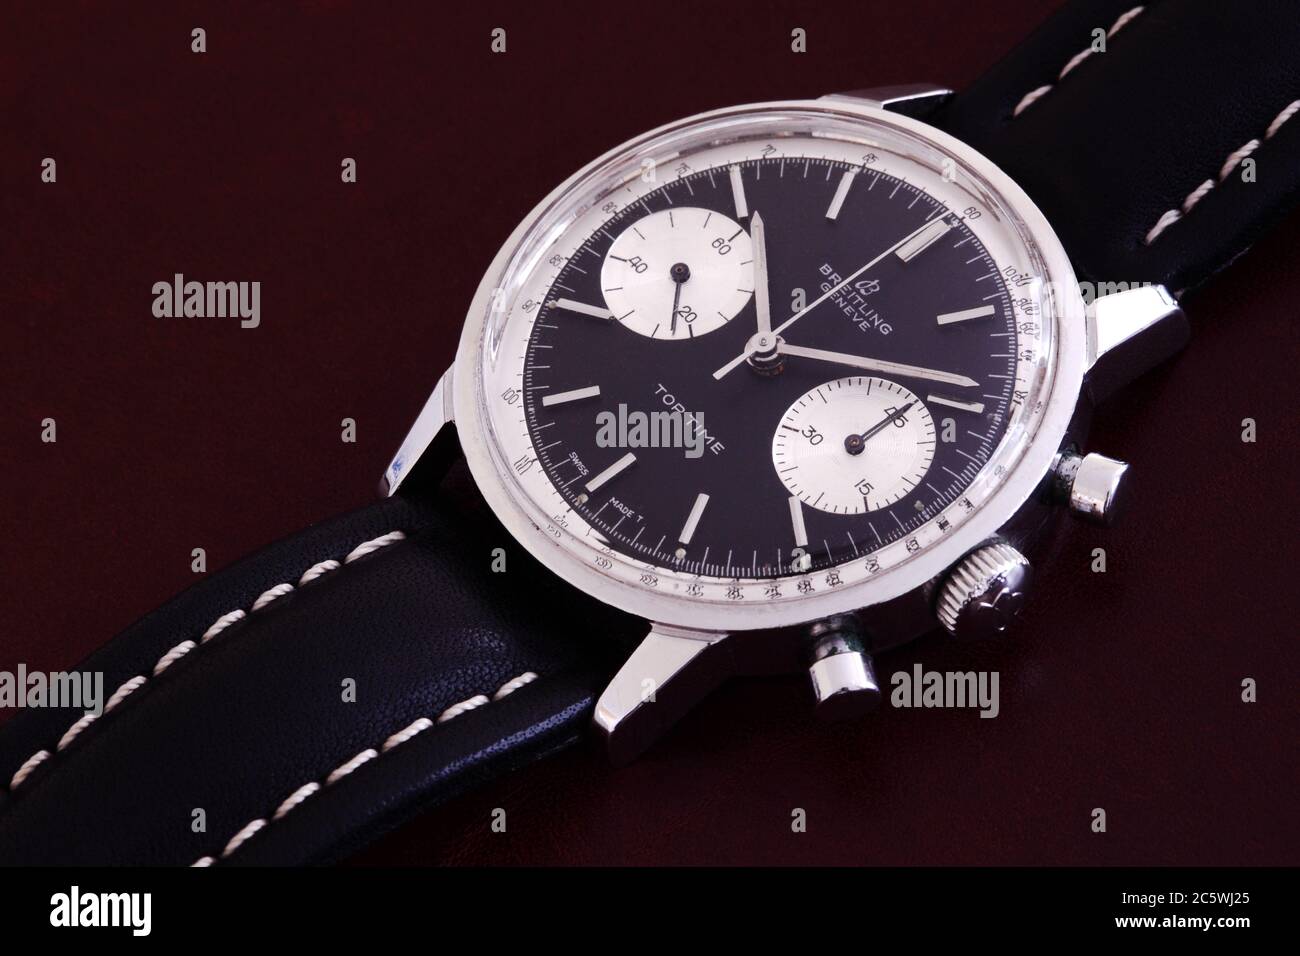 1960 Breitling Top Time 2002 vintage watch chronograph wristwatch Stock Photo